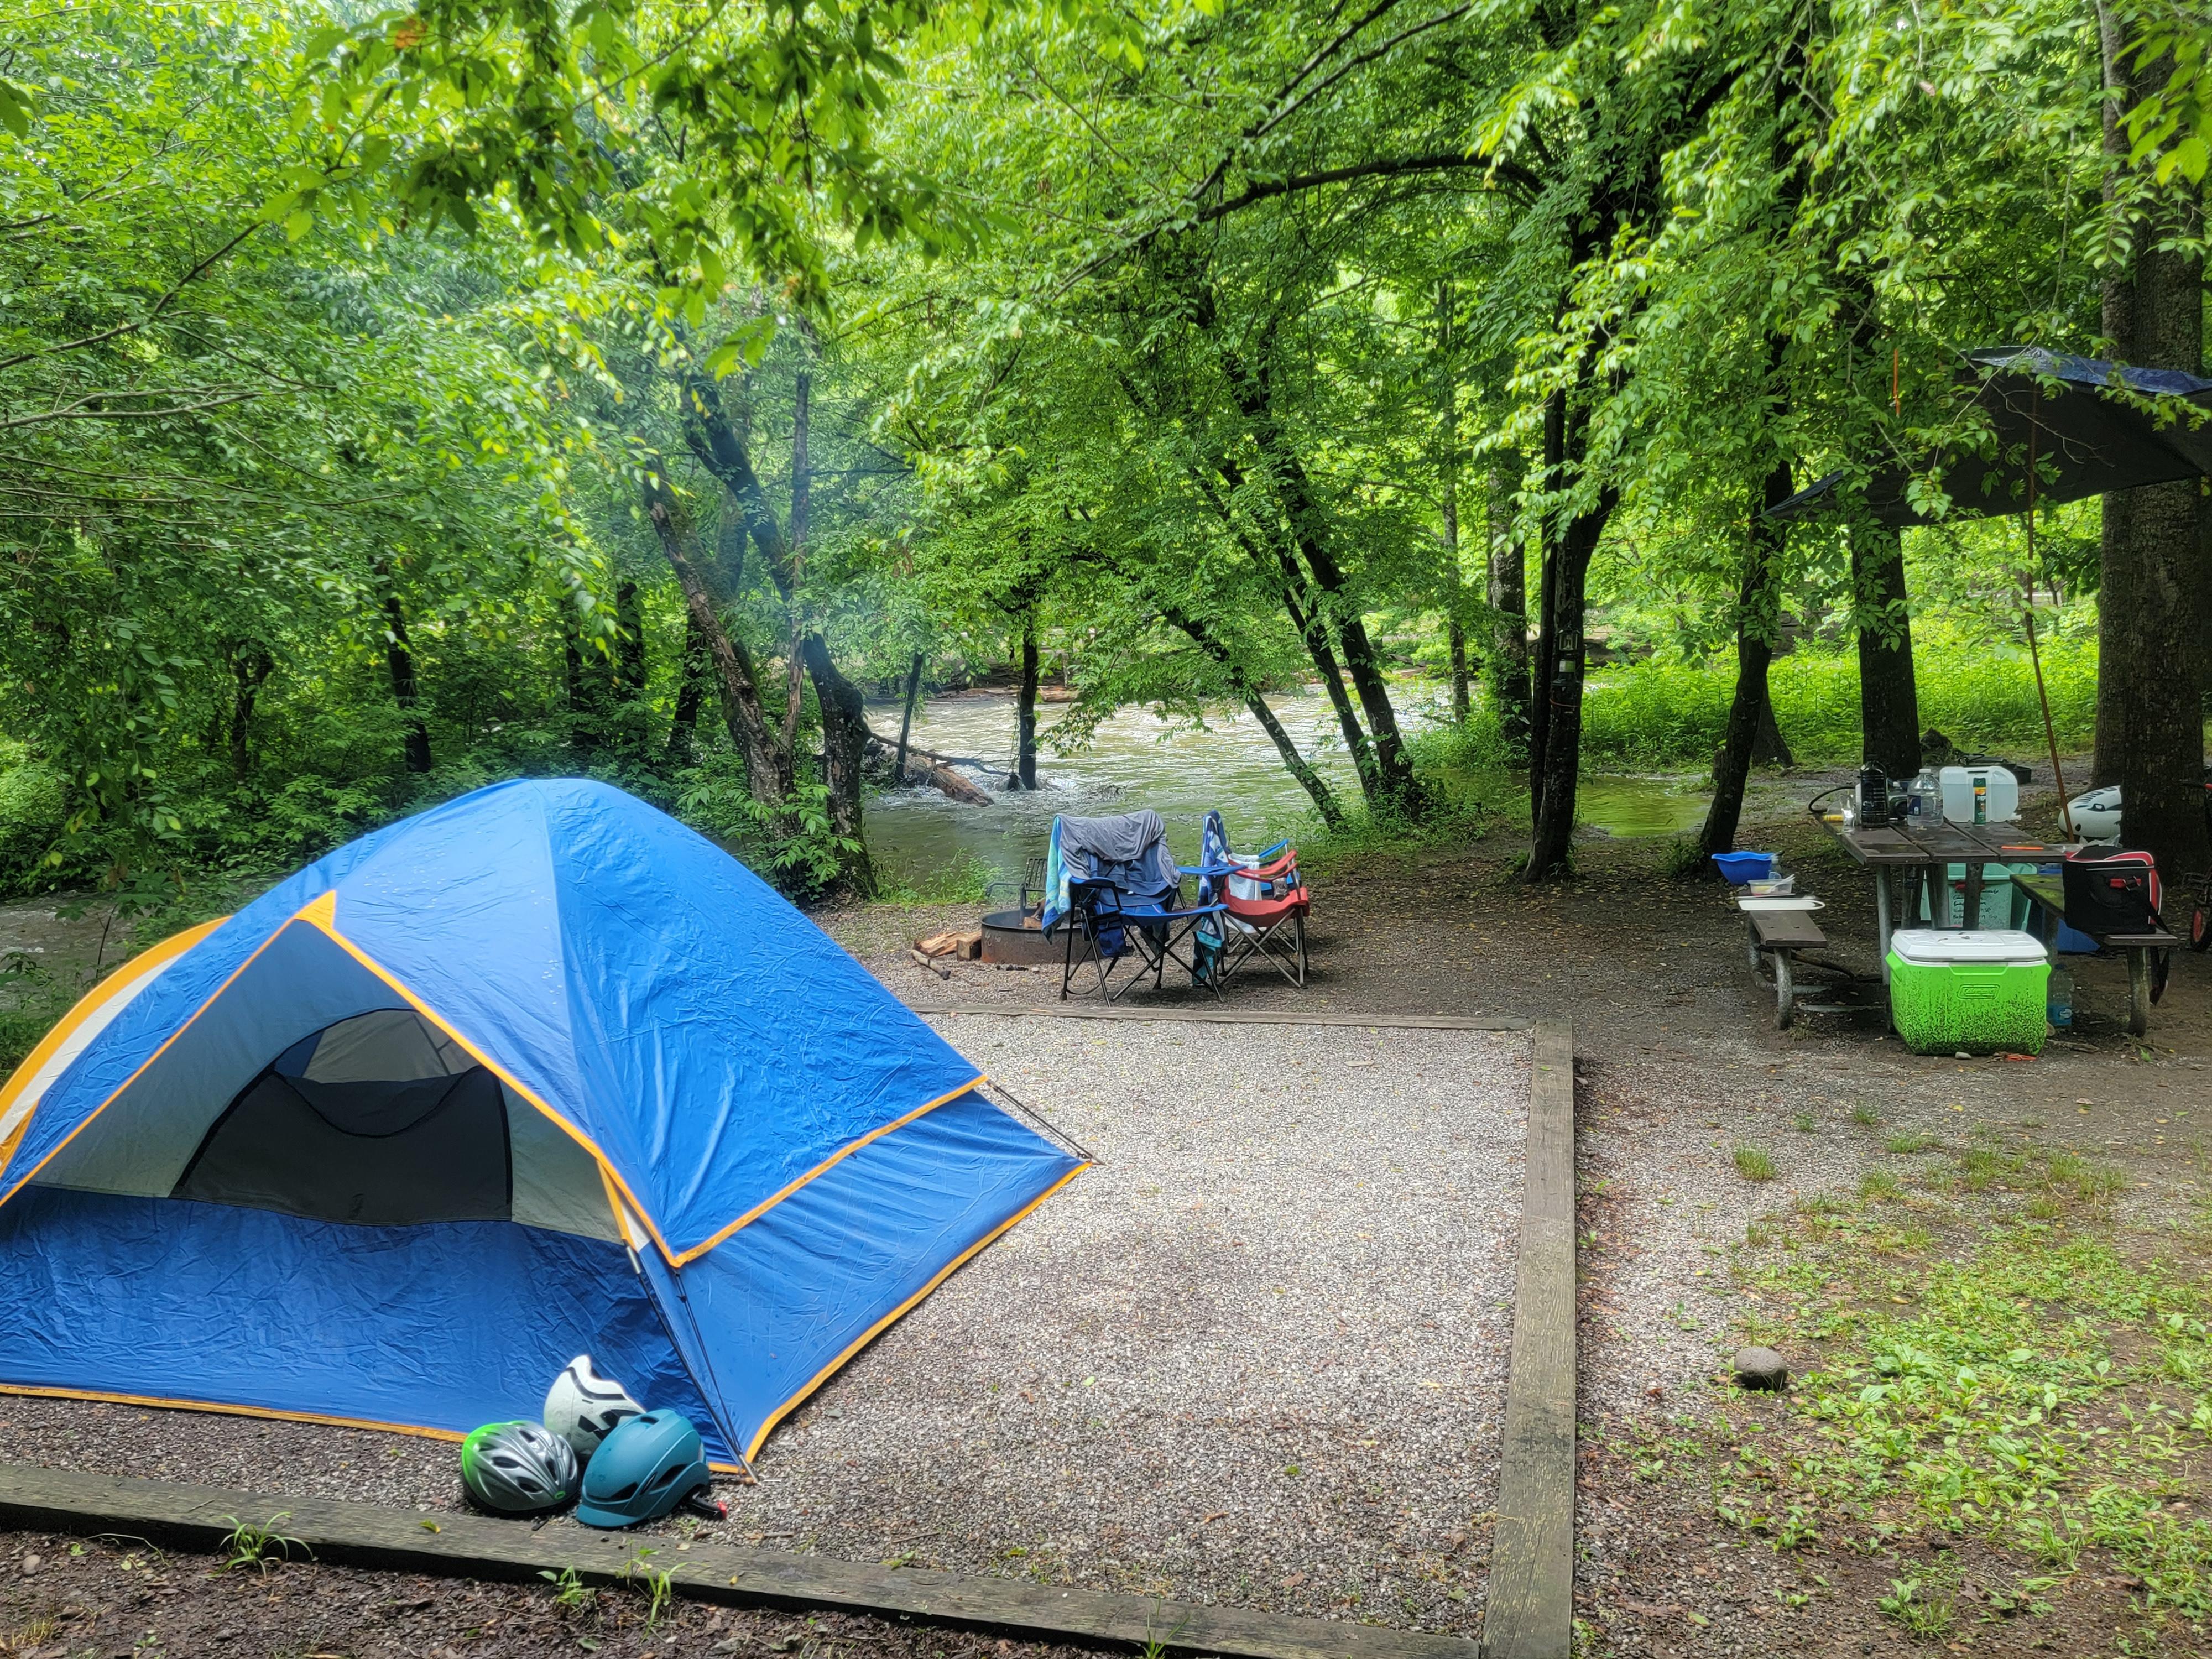 A campsite near flowing water and trees. A blue tent with orange trim sits on the gravel pad.